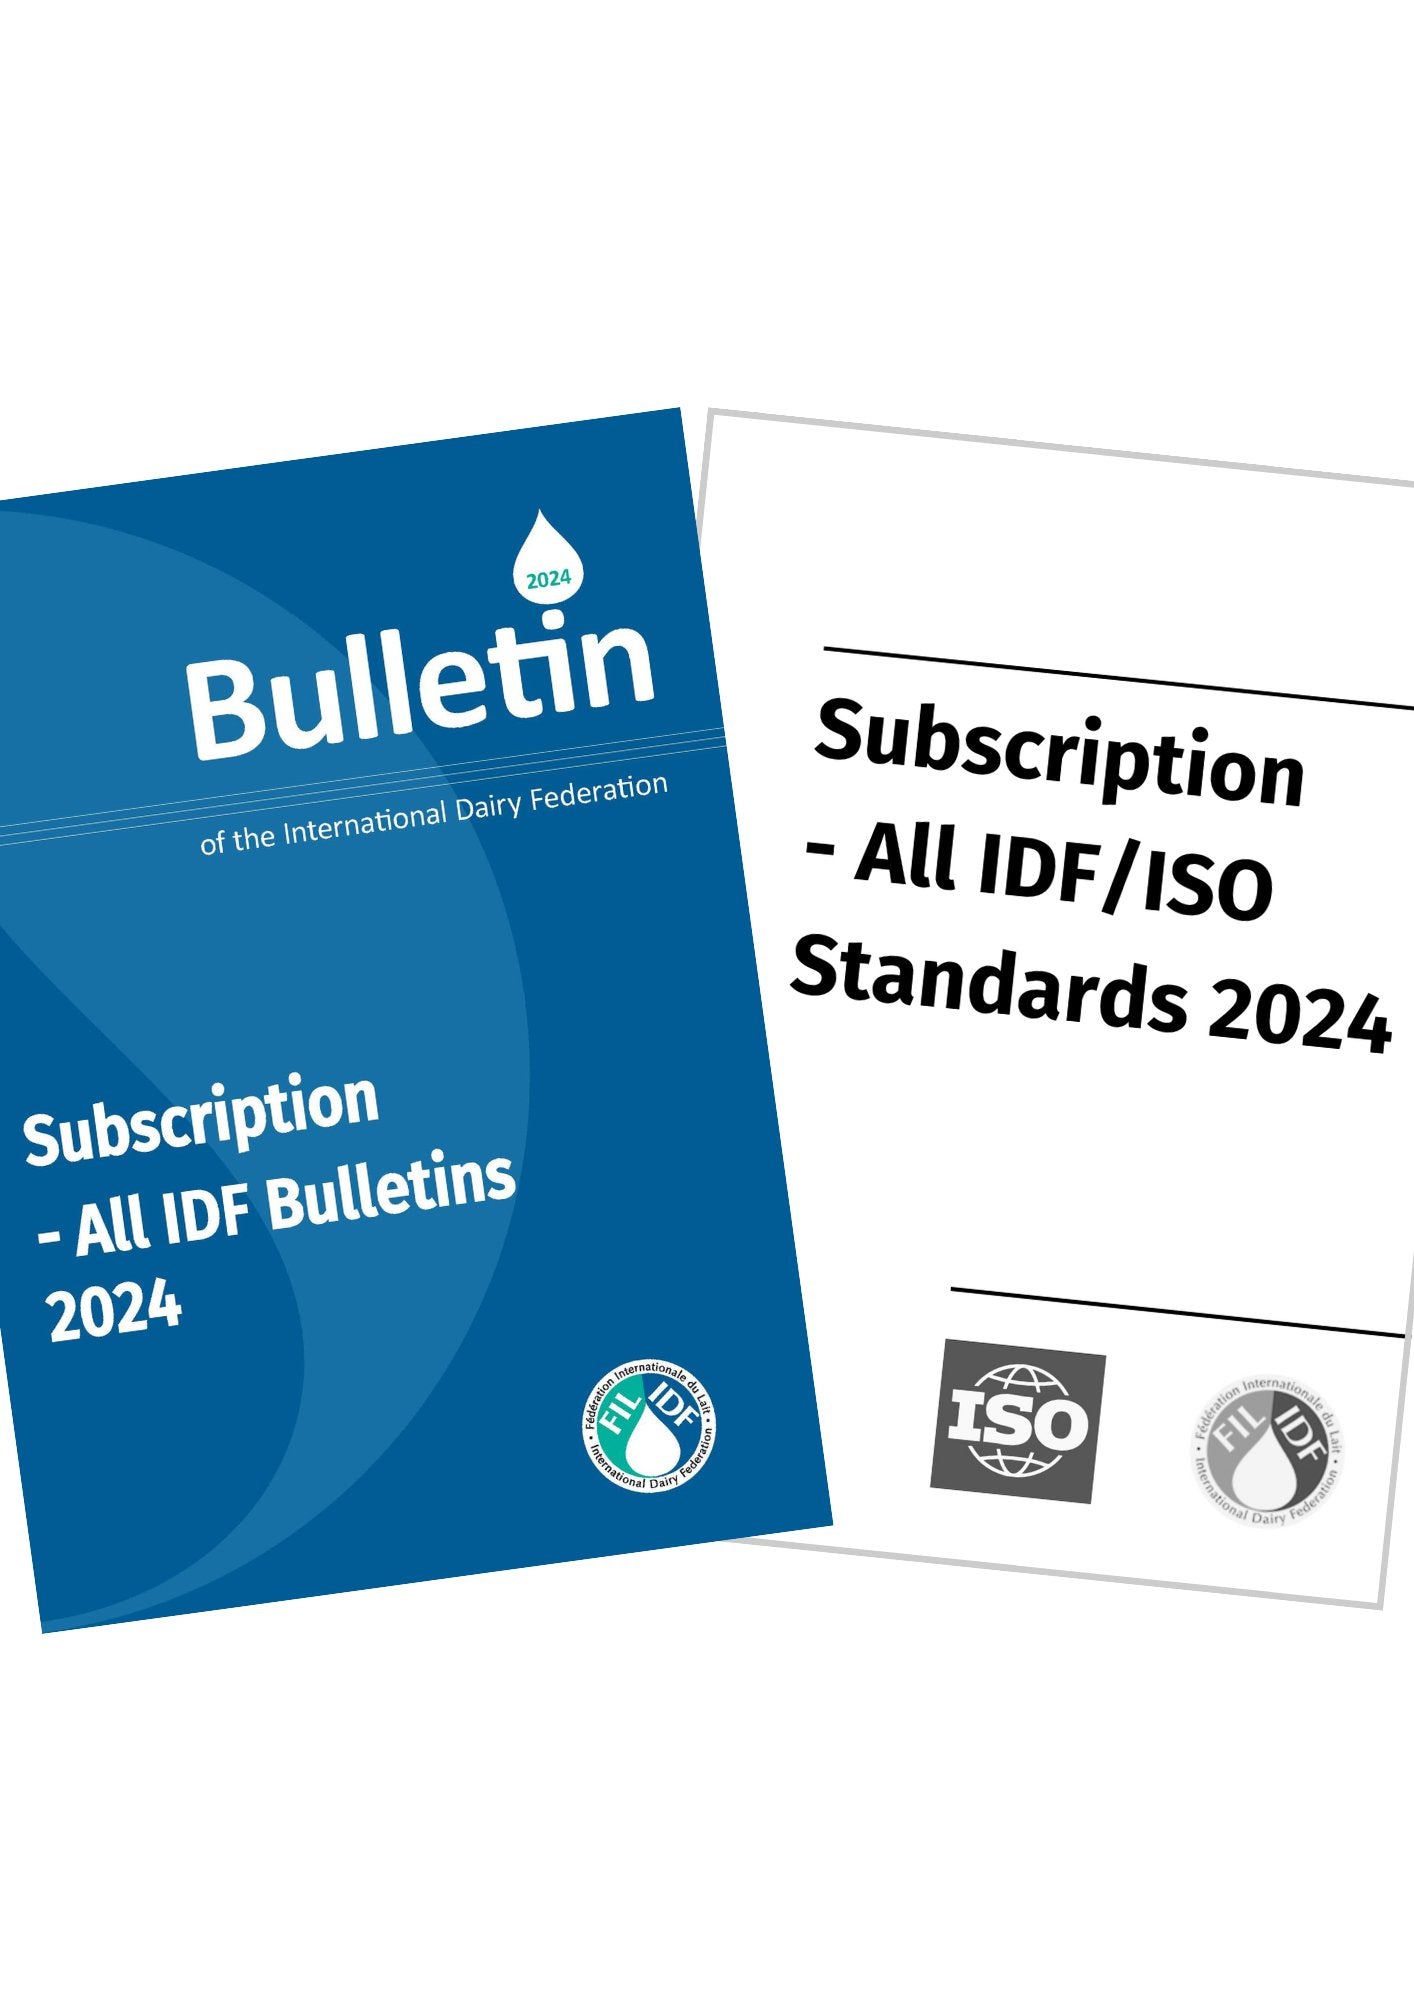 Subscription to all the Standards and Bulletins of the IDF 2024 - FIL-IDF